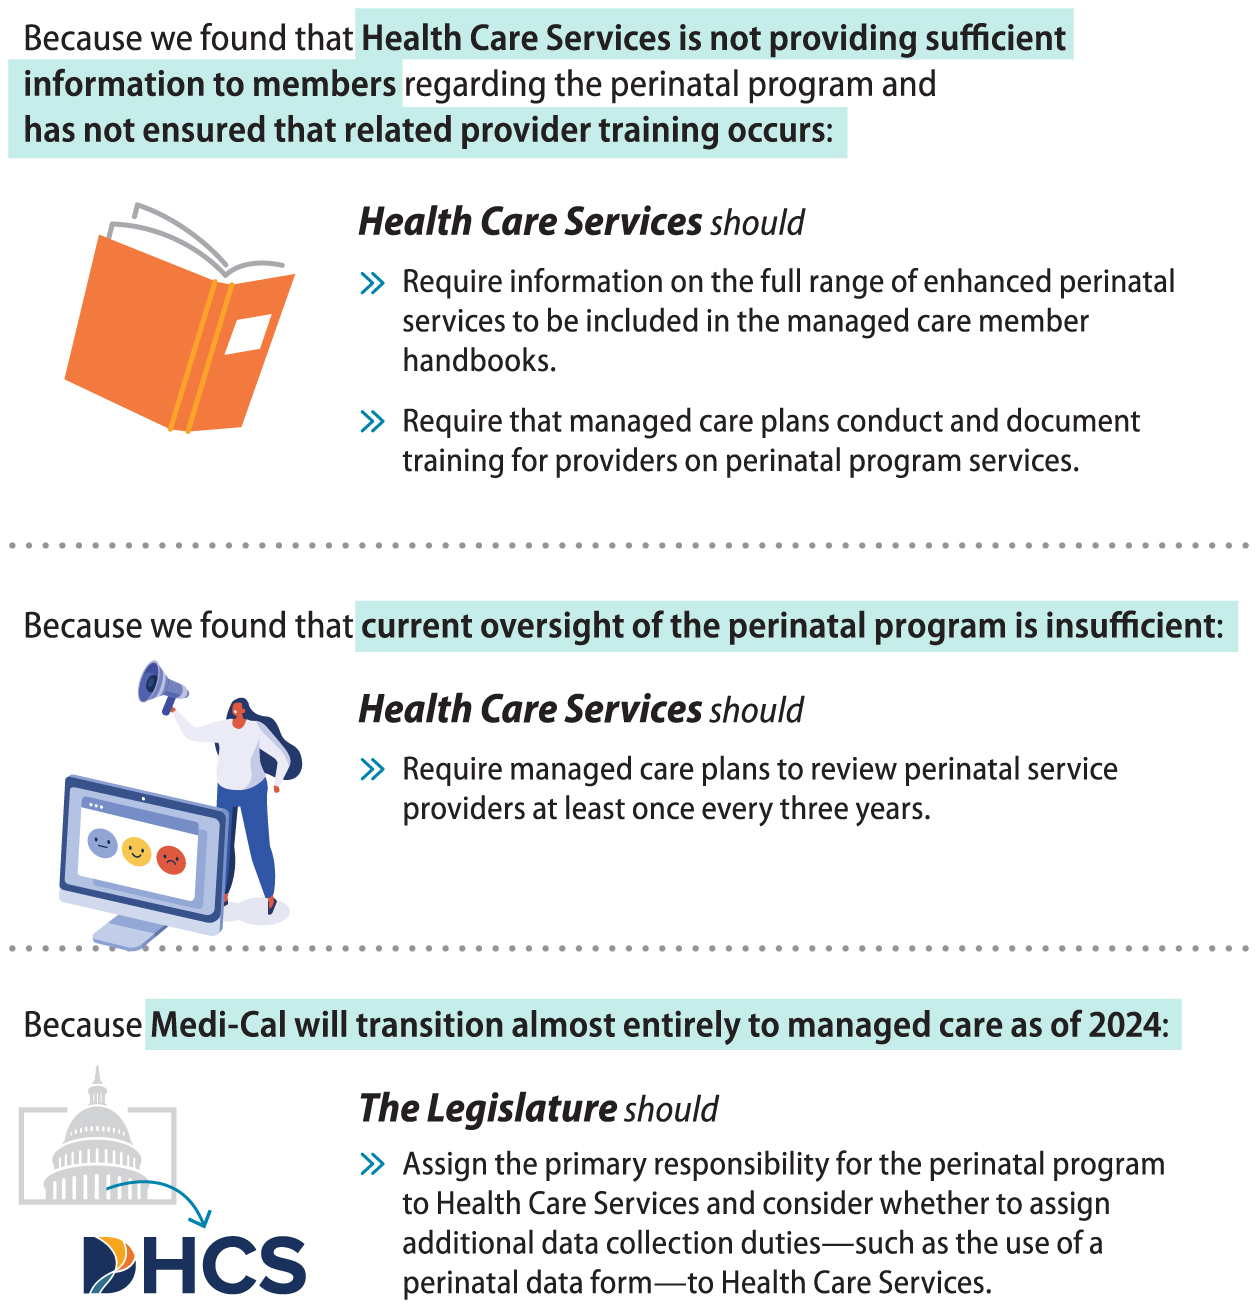 A graphic summarizing our recommendations to Health Care Services and to the Legislature